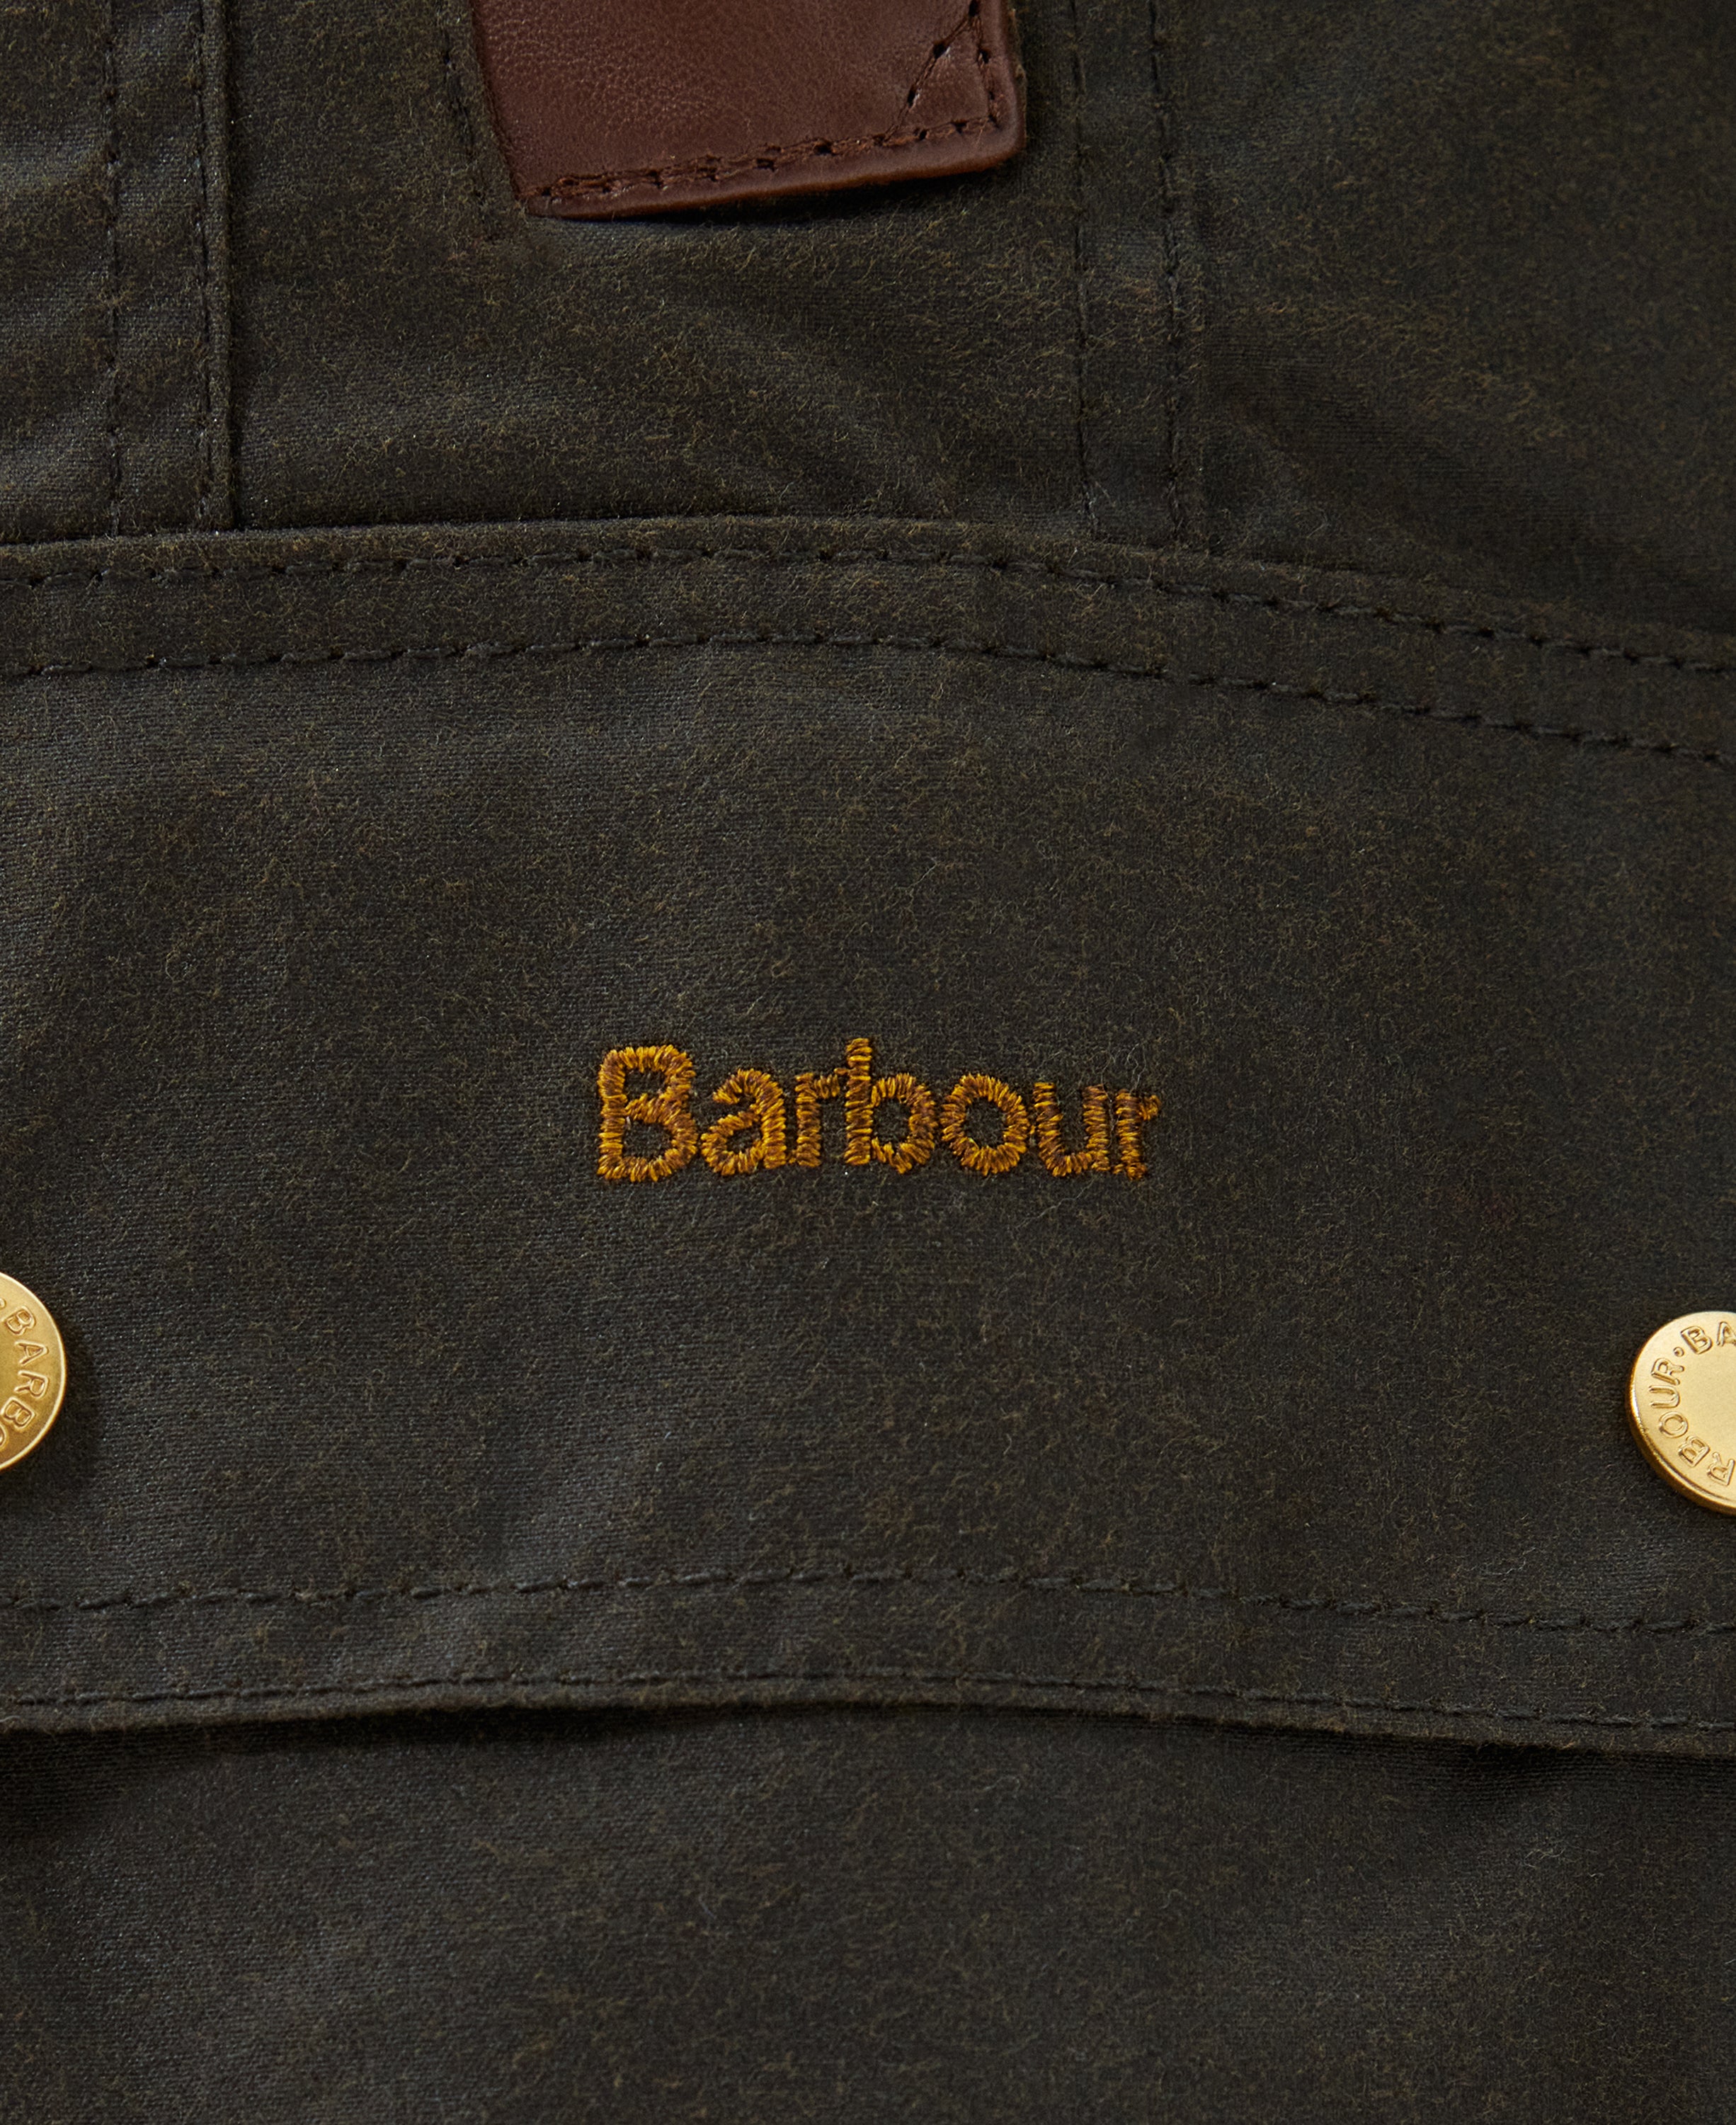 Barbour Premium Beadnell Jacket Olive